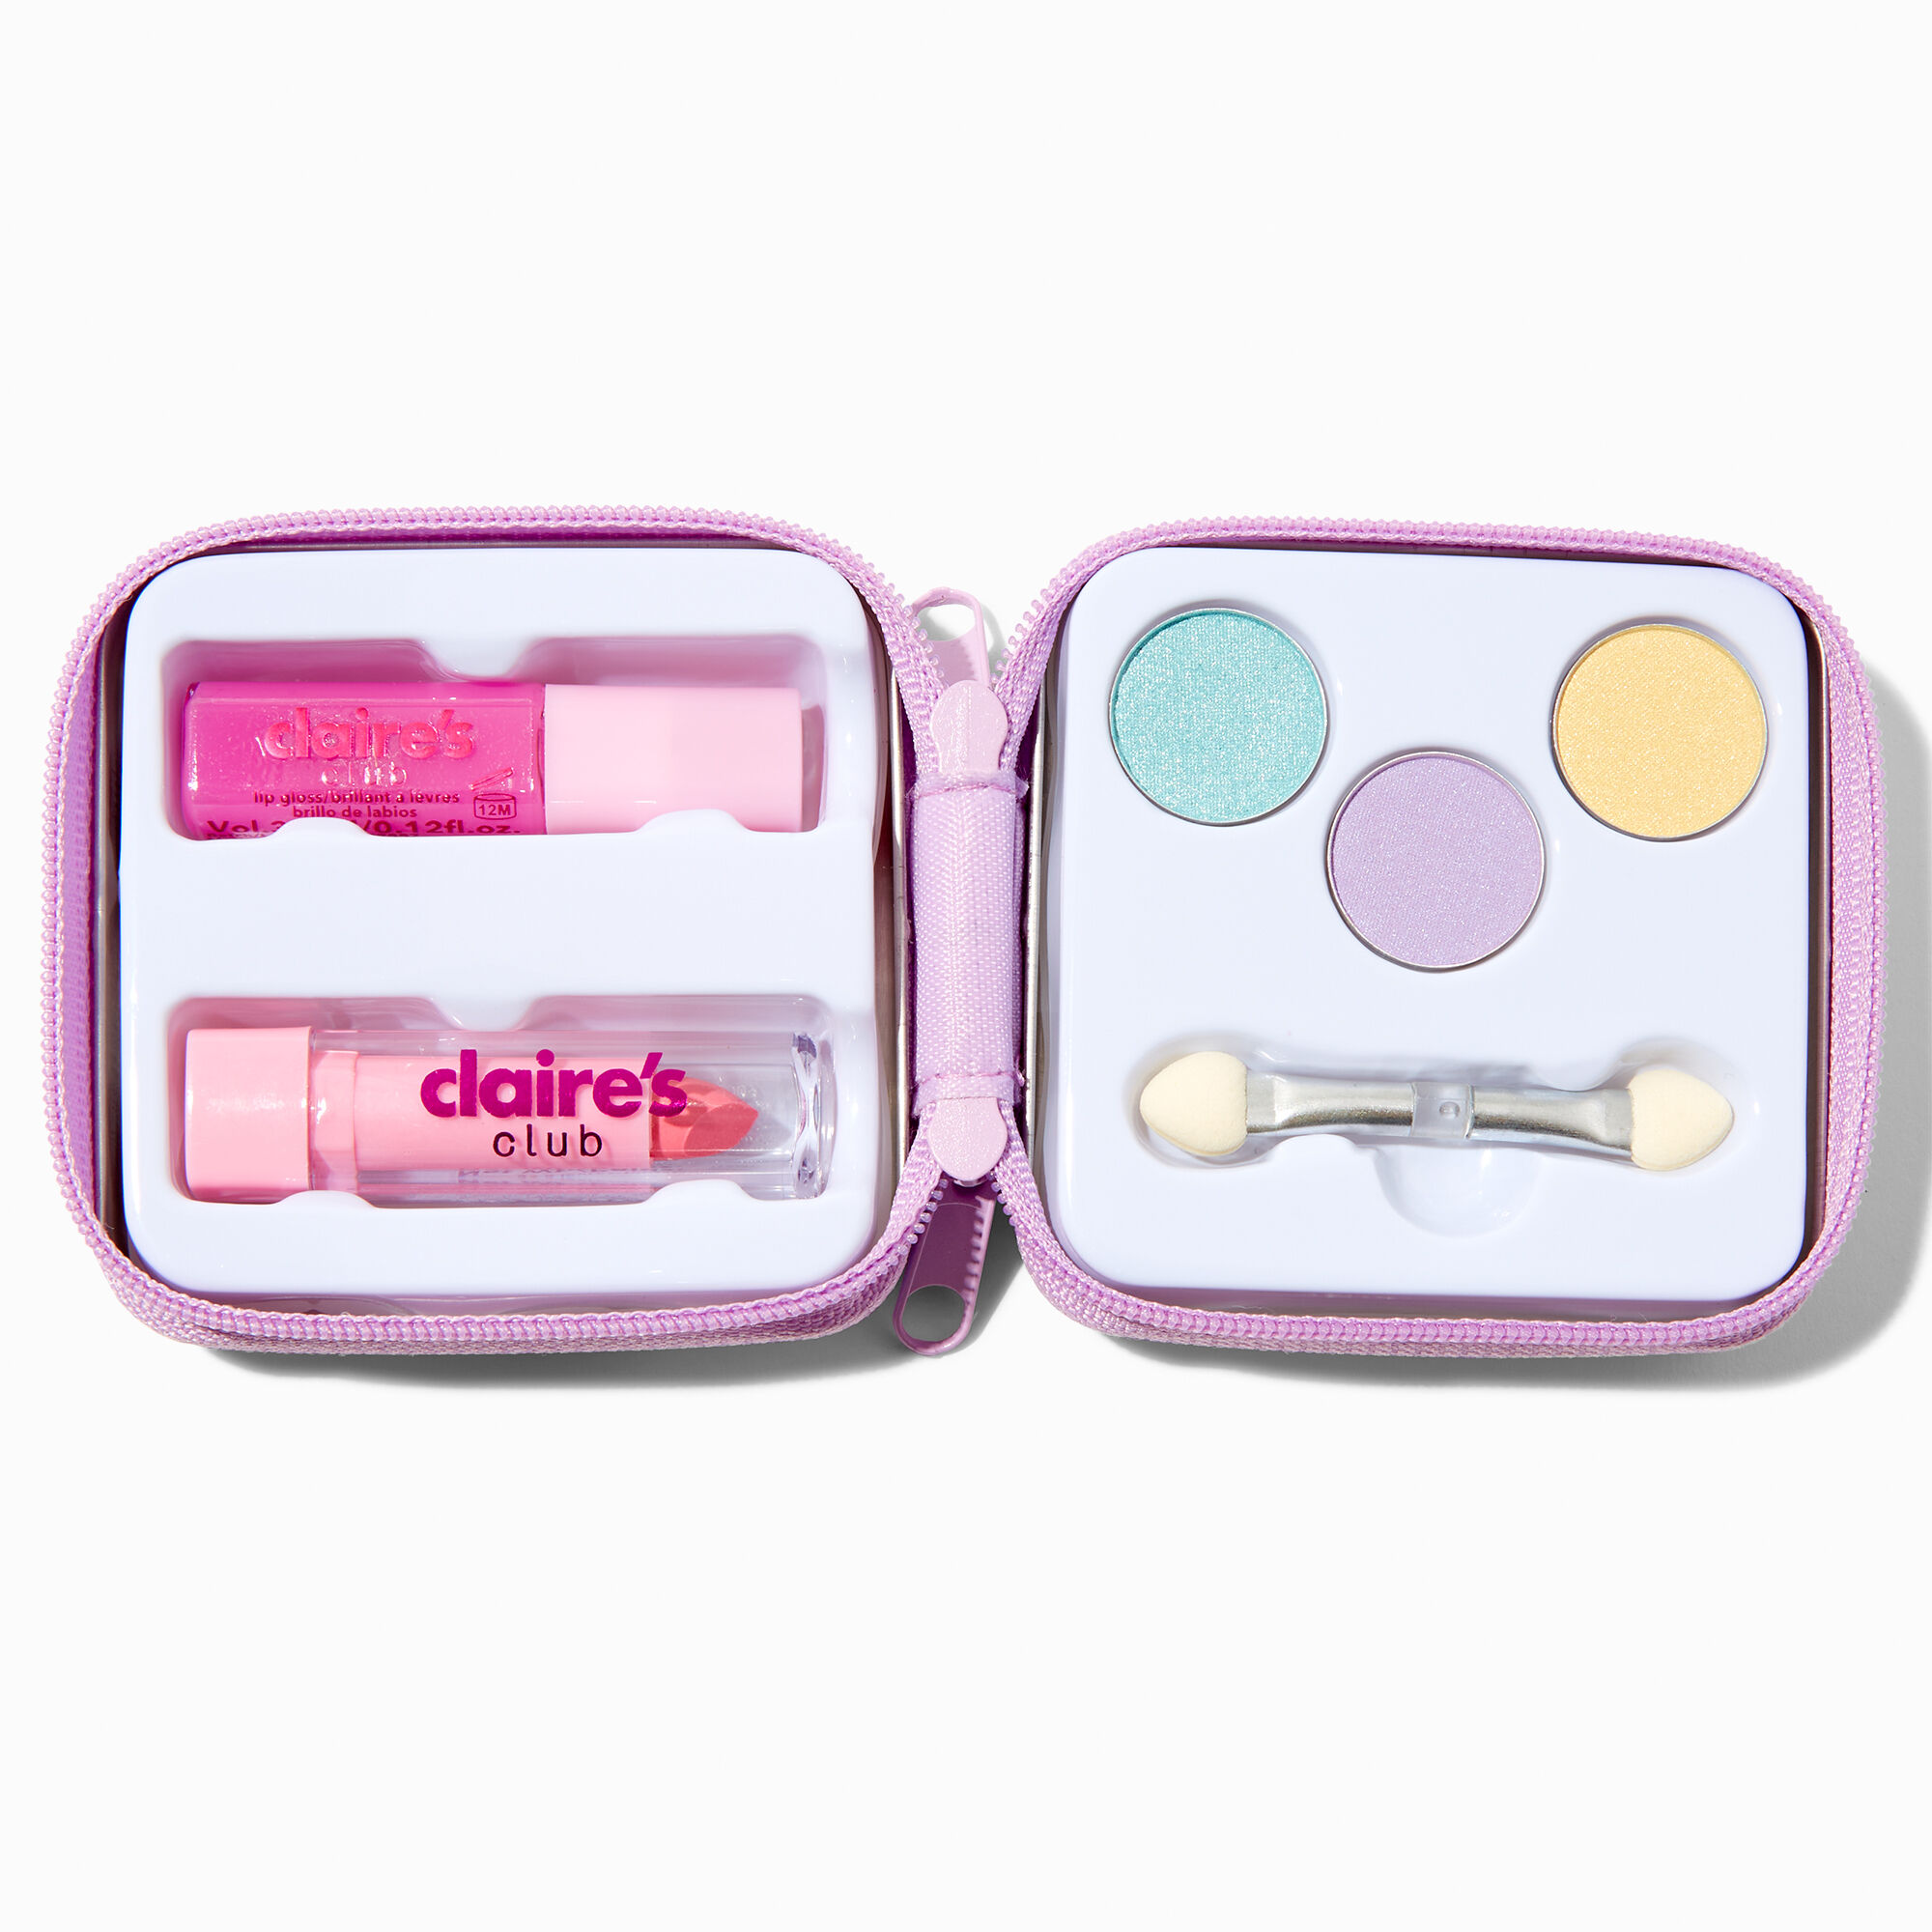 View Claires Club Glitter Butterfly MakeUp Tin Purple information